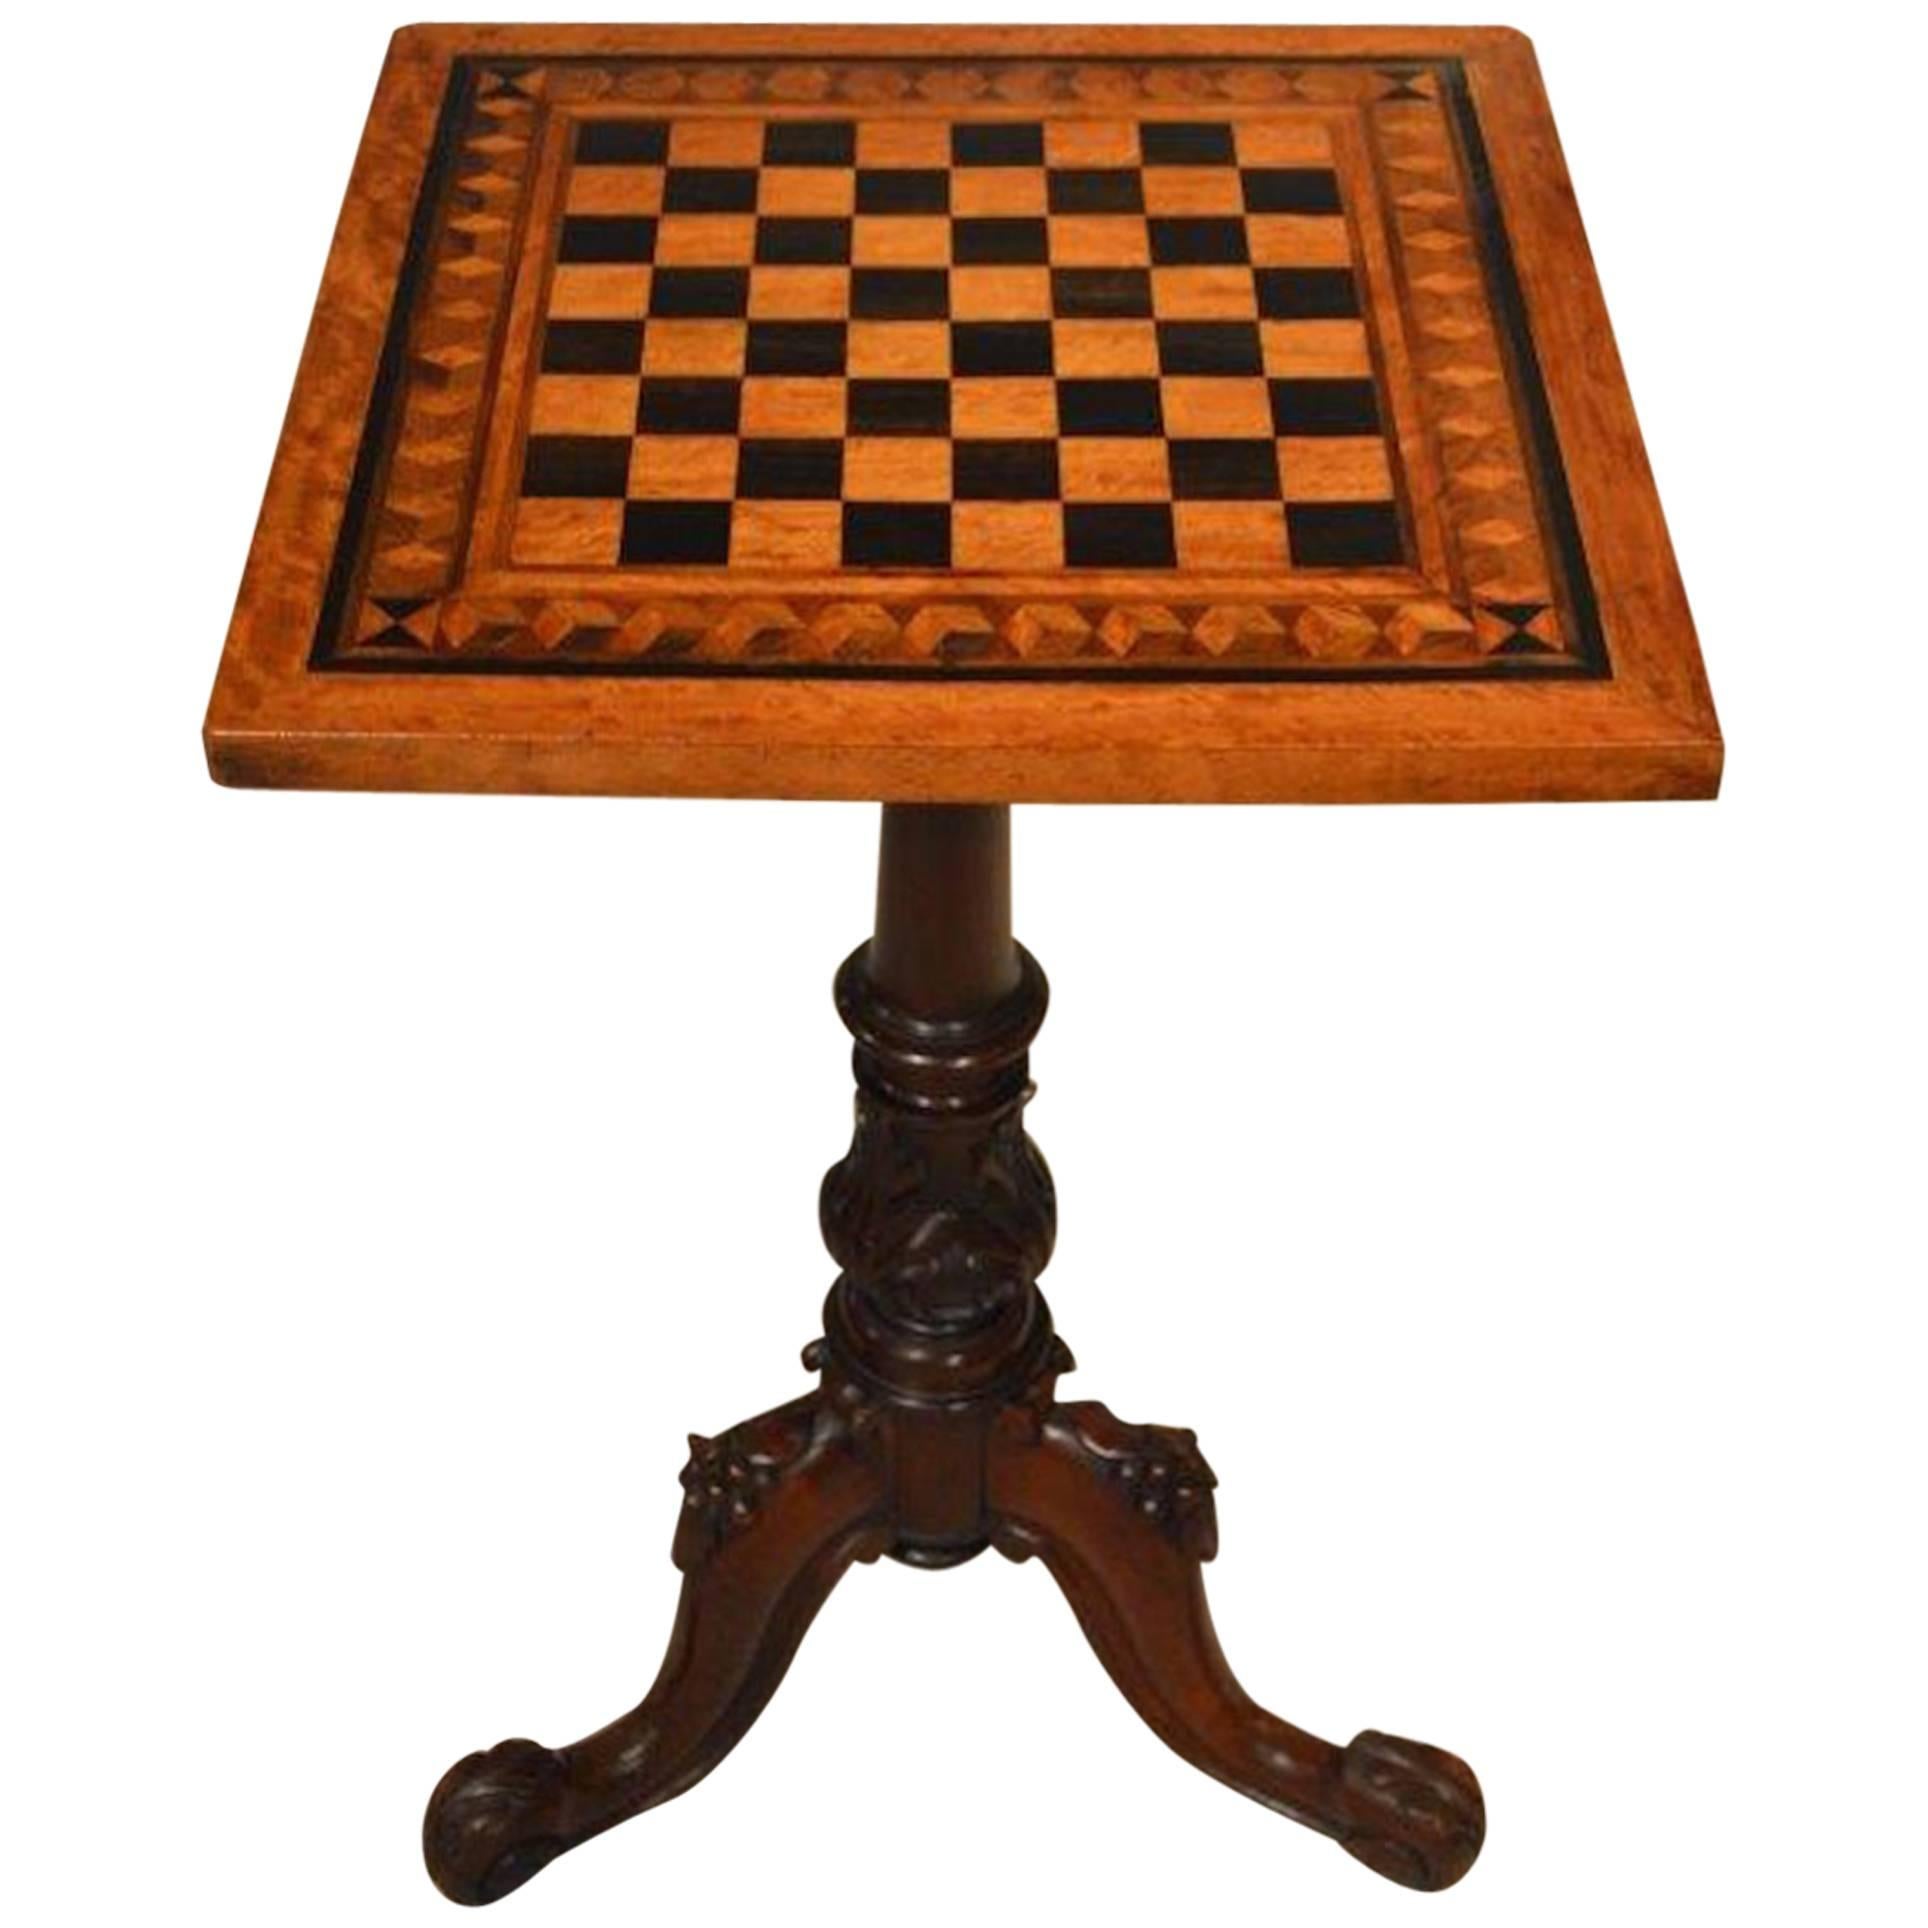 Beautiful Satinwood, Mahogany and Parquetry Inlaid, Early Victorian Period